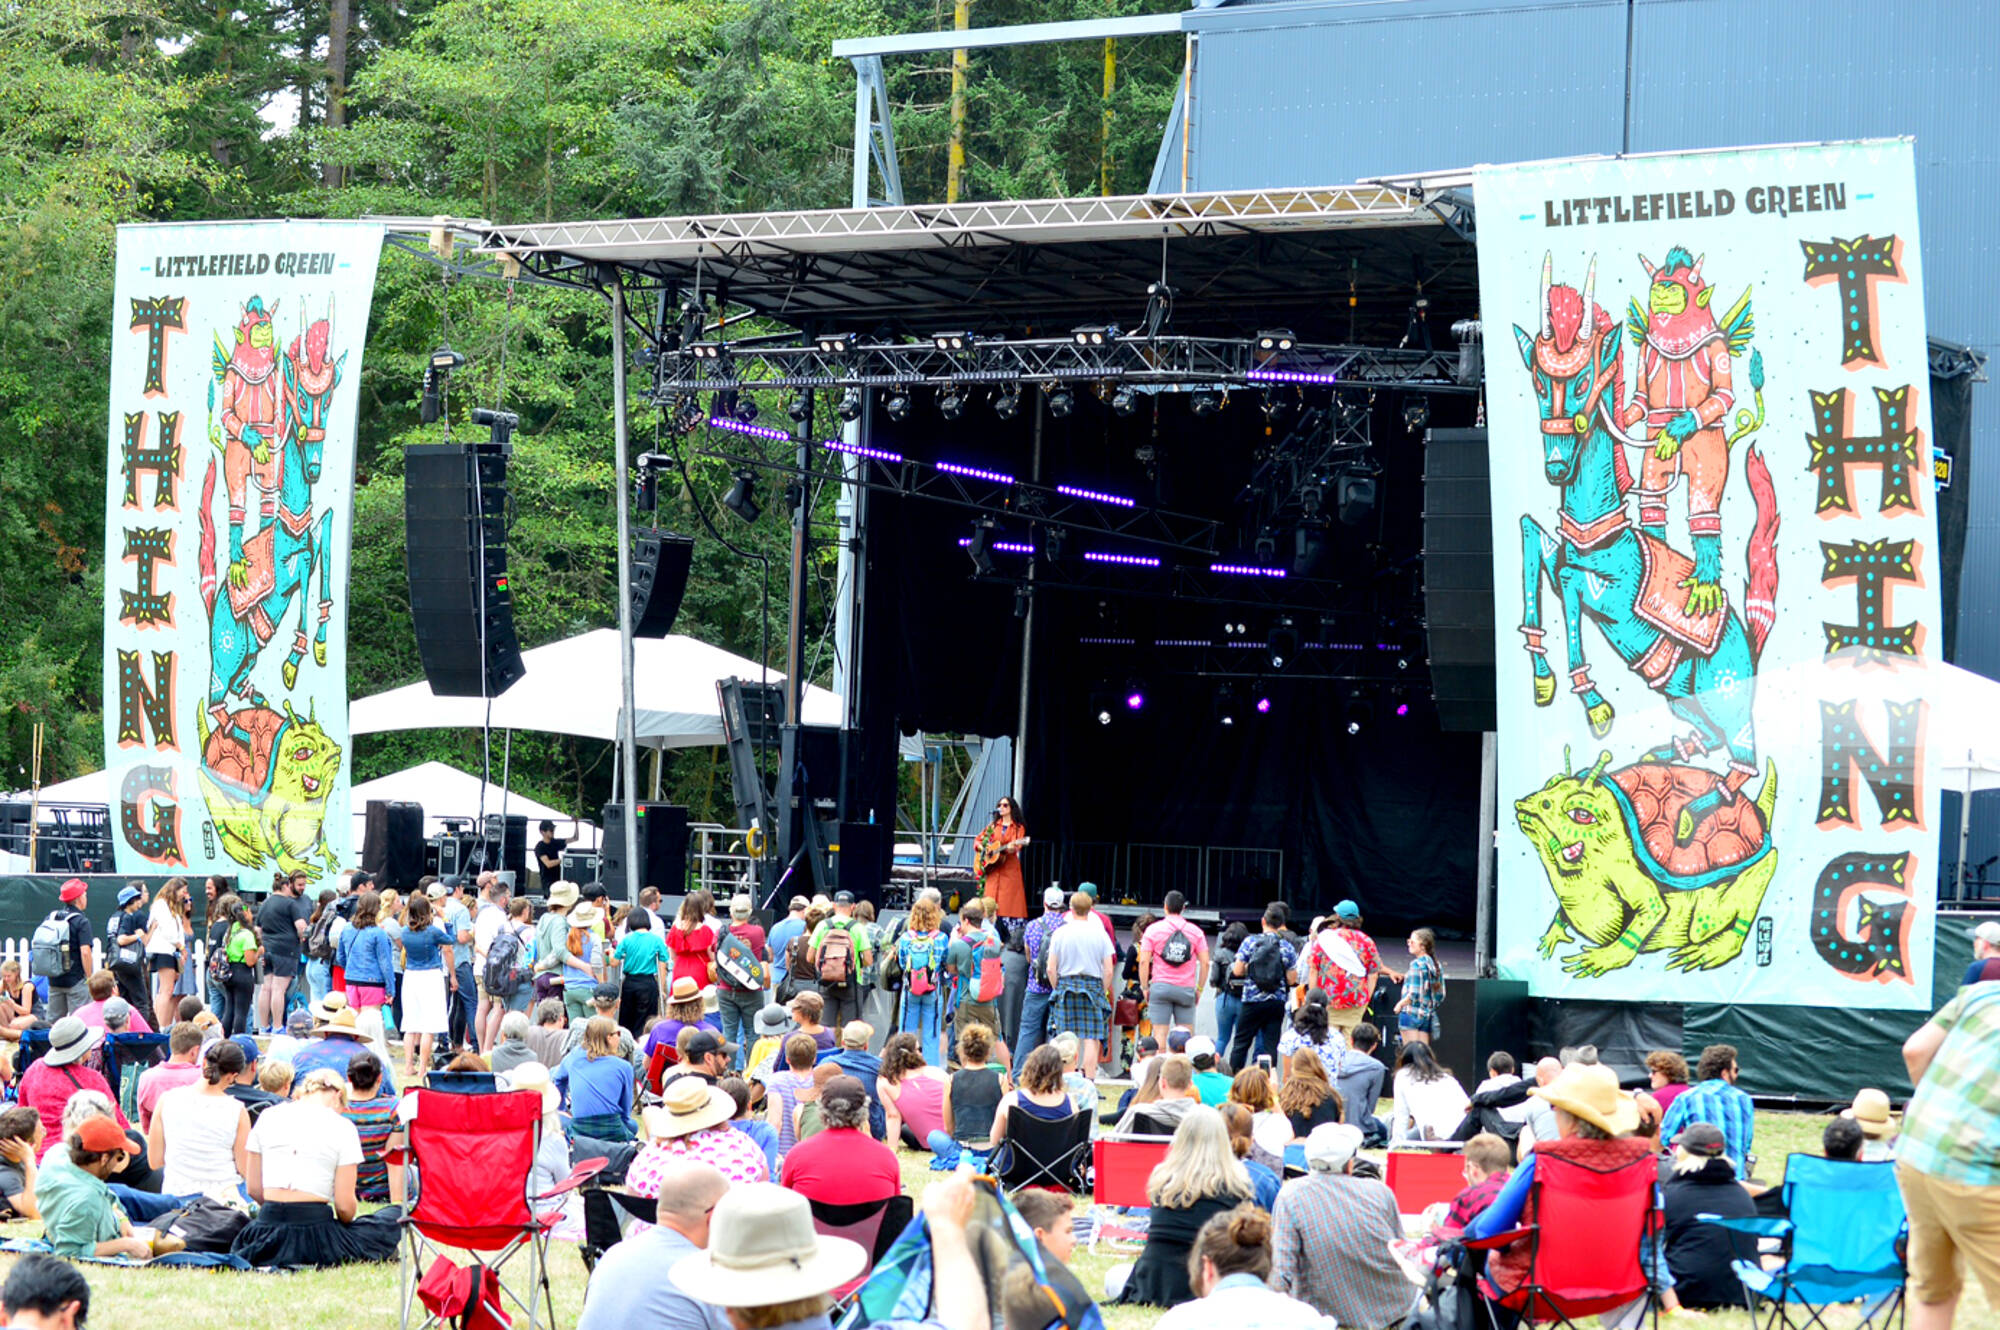 The inaugural THING festival in 2019 drew thousands to Fort Worden State Park and was then postponed by the pandemic until 2022. The three-day event is scheduled to return to the fort in August. (Diane Urbani de la Paz/Peninsula Daily News)